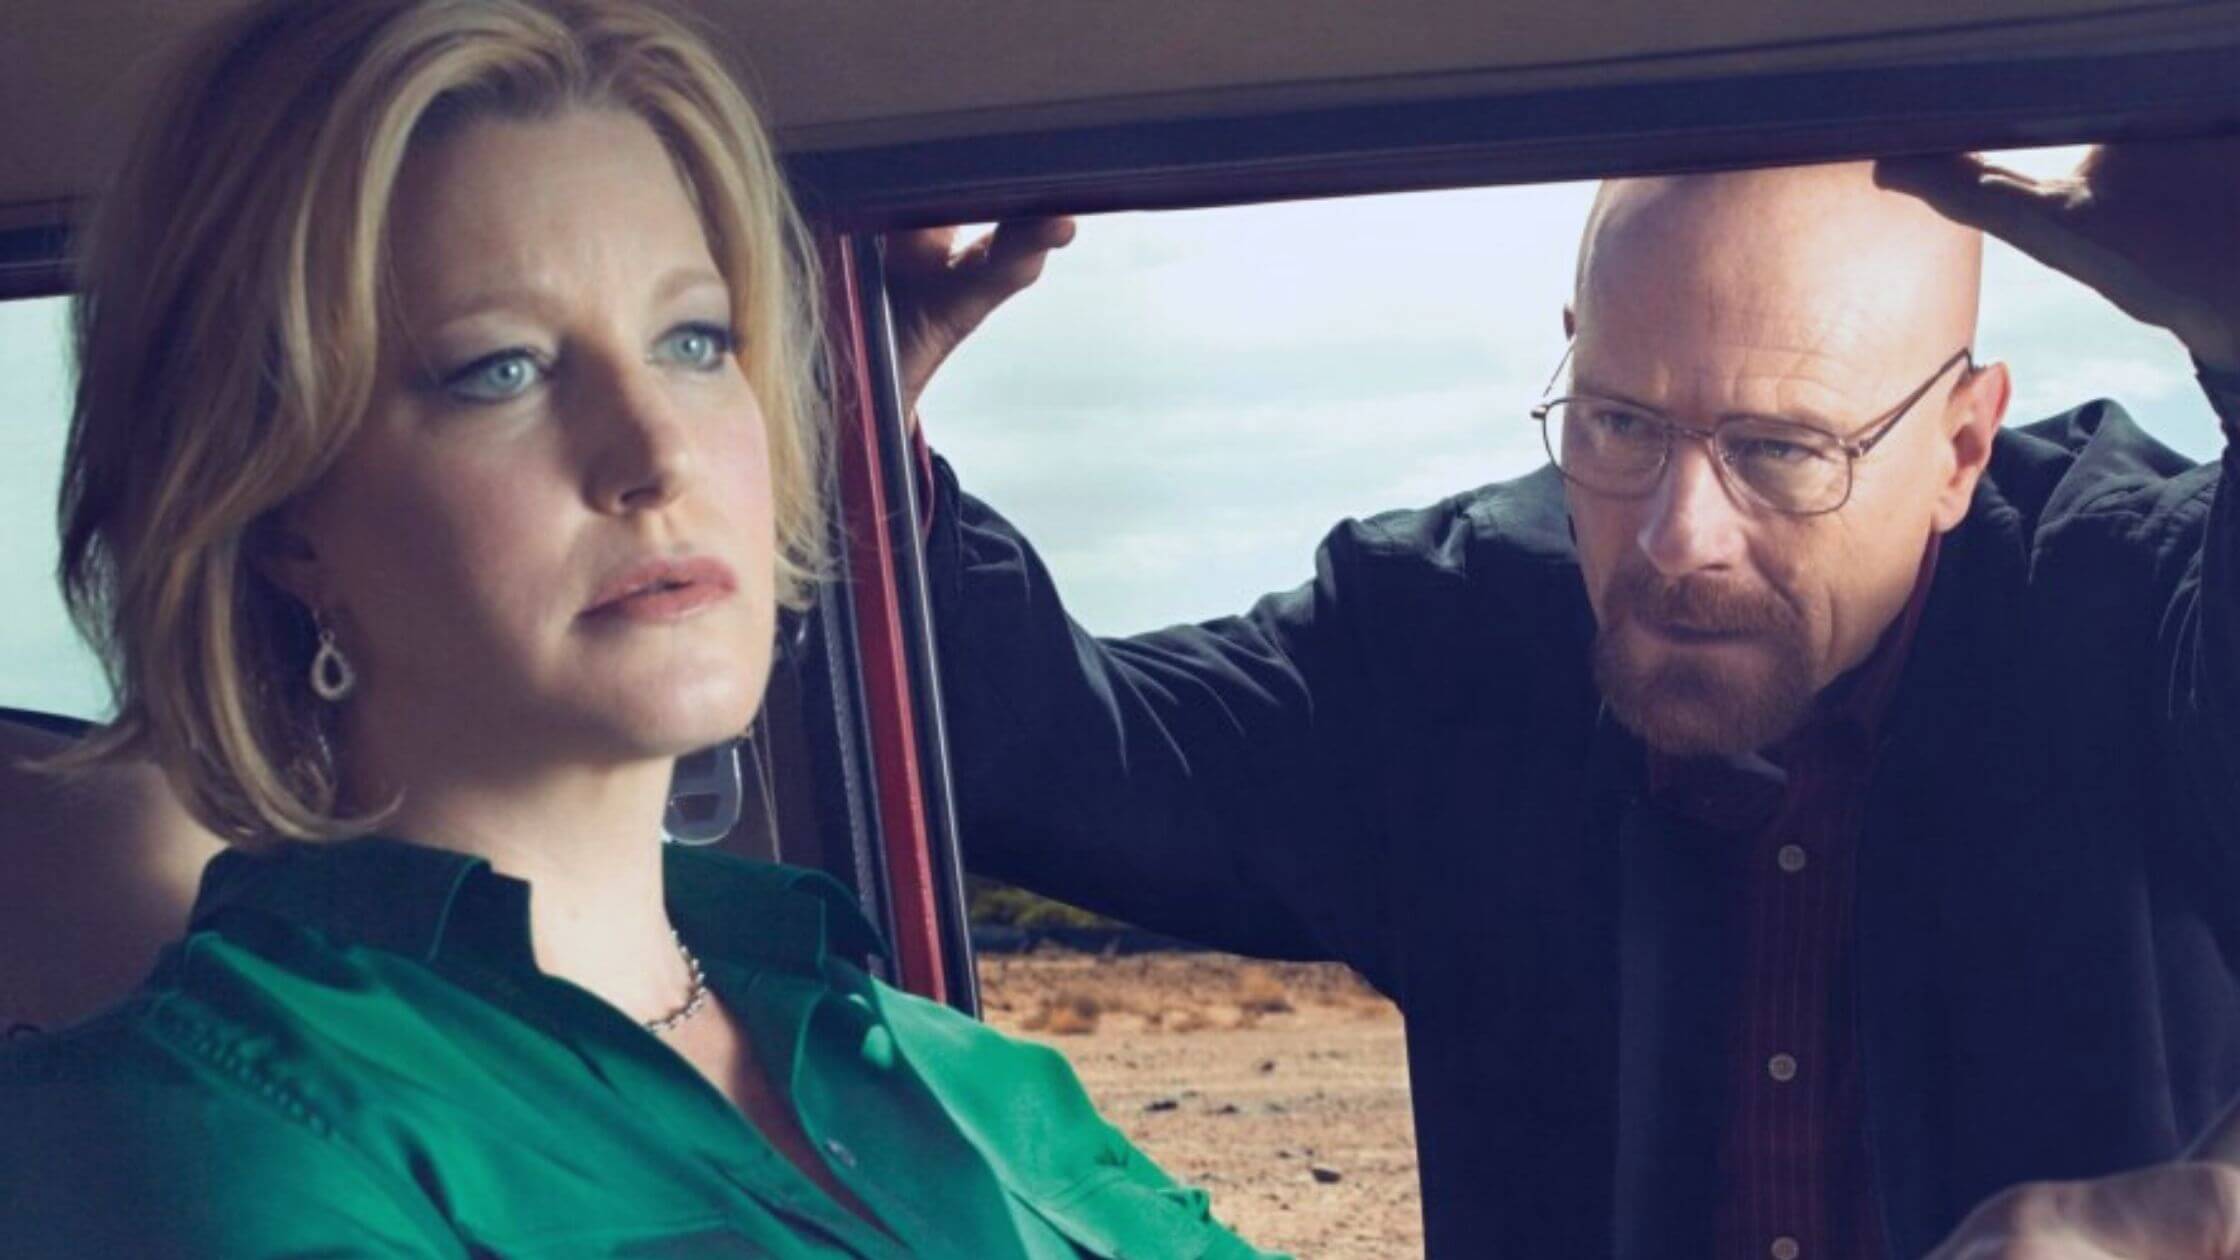 What-Happens-To-Skyler-White-At-The-End-Of-Breaking-Bad-Does-She-Die-If-So-Who-Kills-Her-1